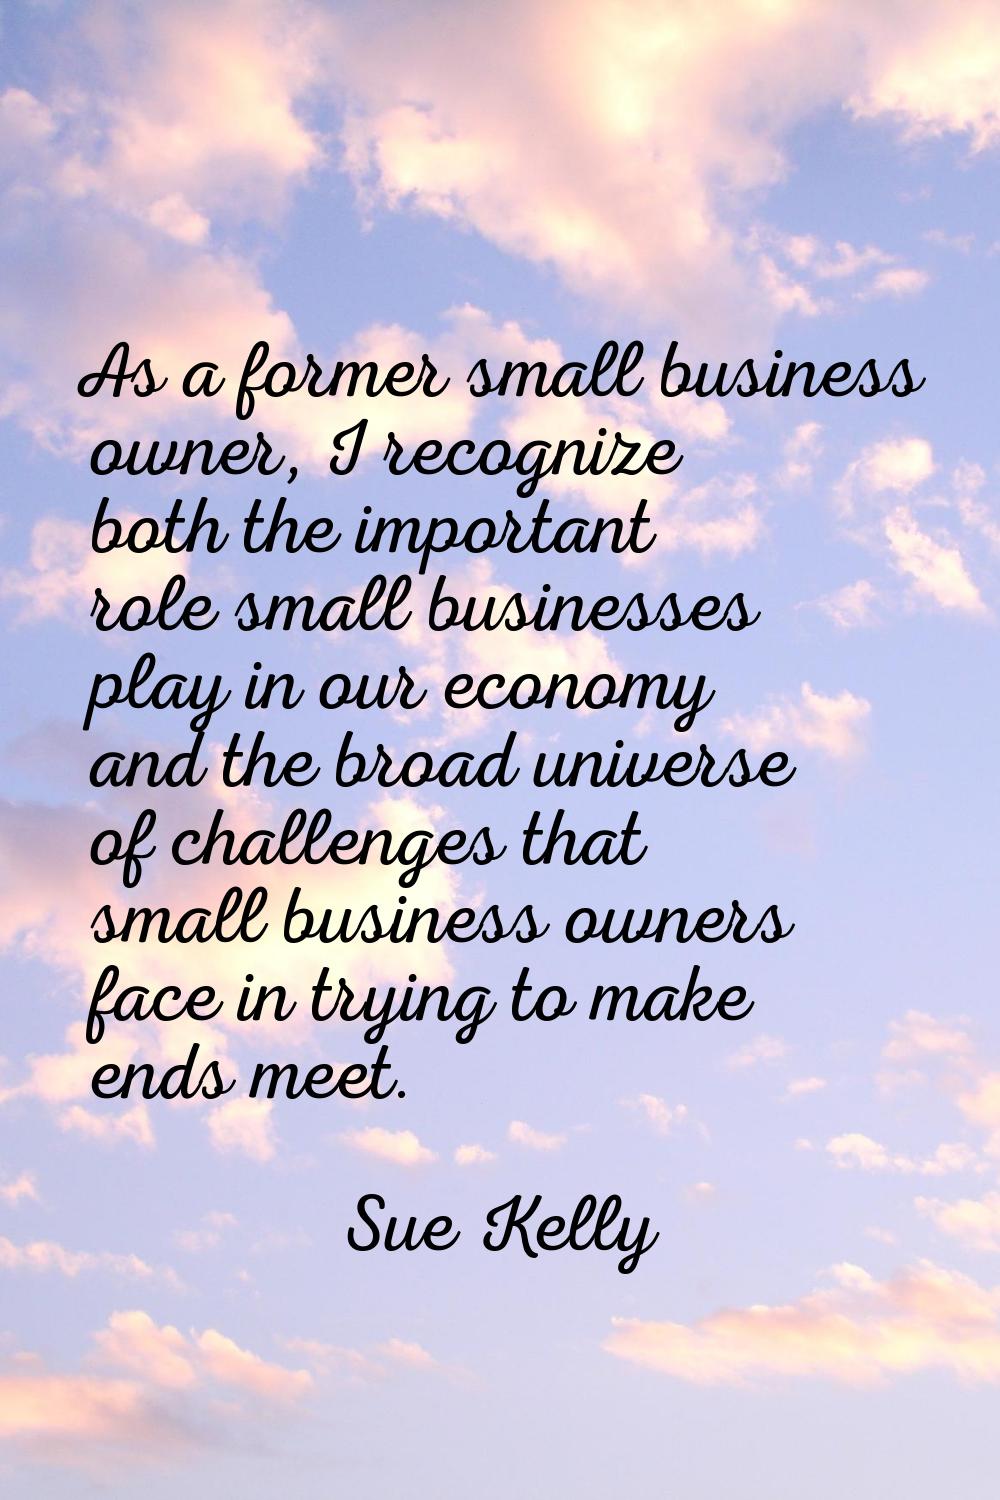 As a former small business owner, I recognize both the important role small businesses play in our 